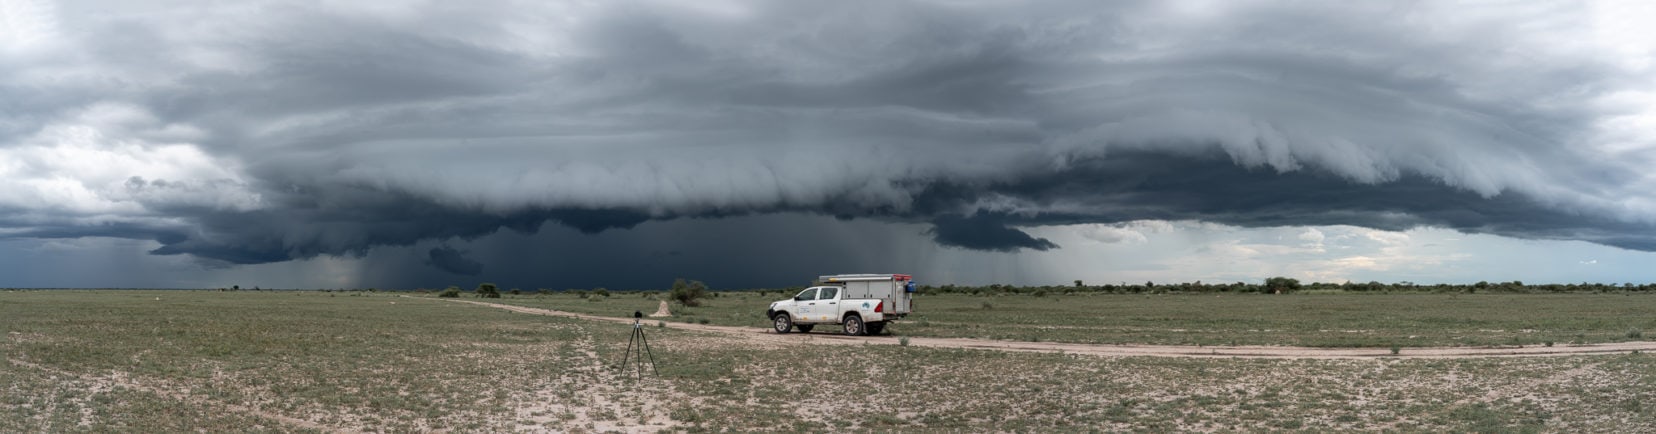 Driving in Nxai pans - camper with storm clouds in distance